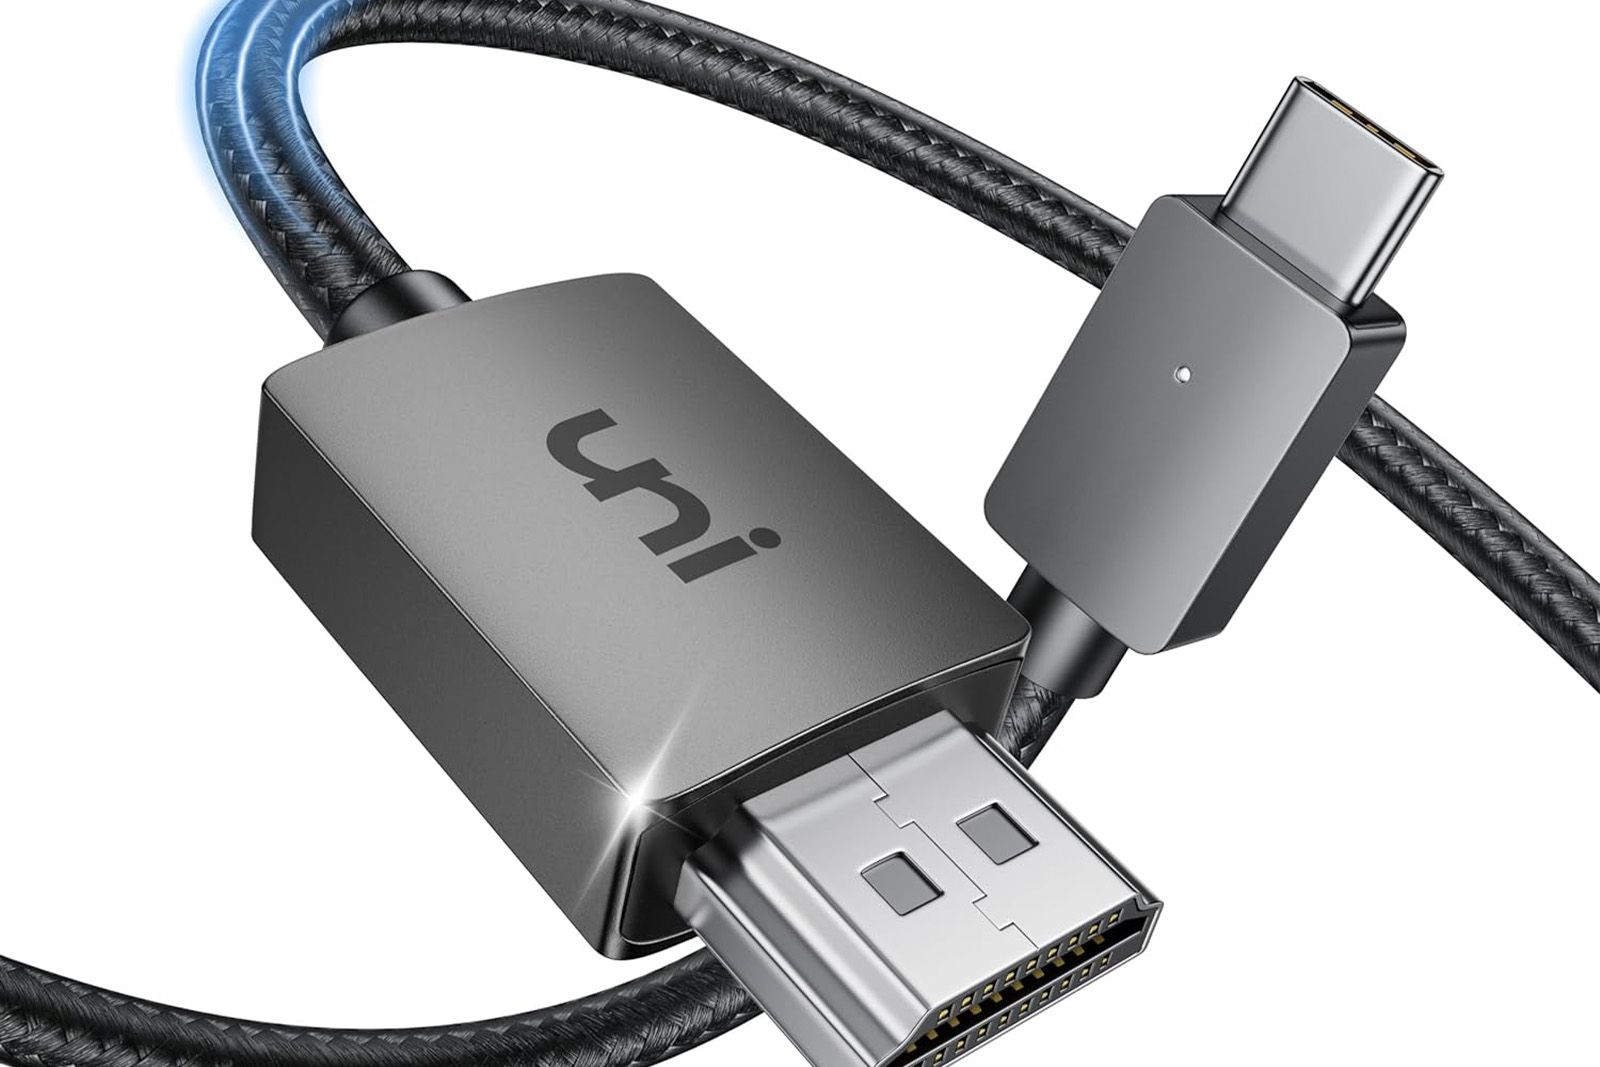 Uni USB C to HDMI Cable